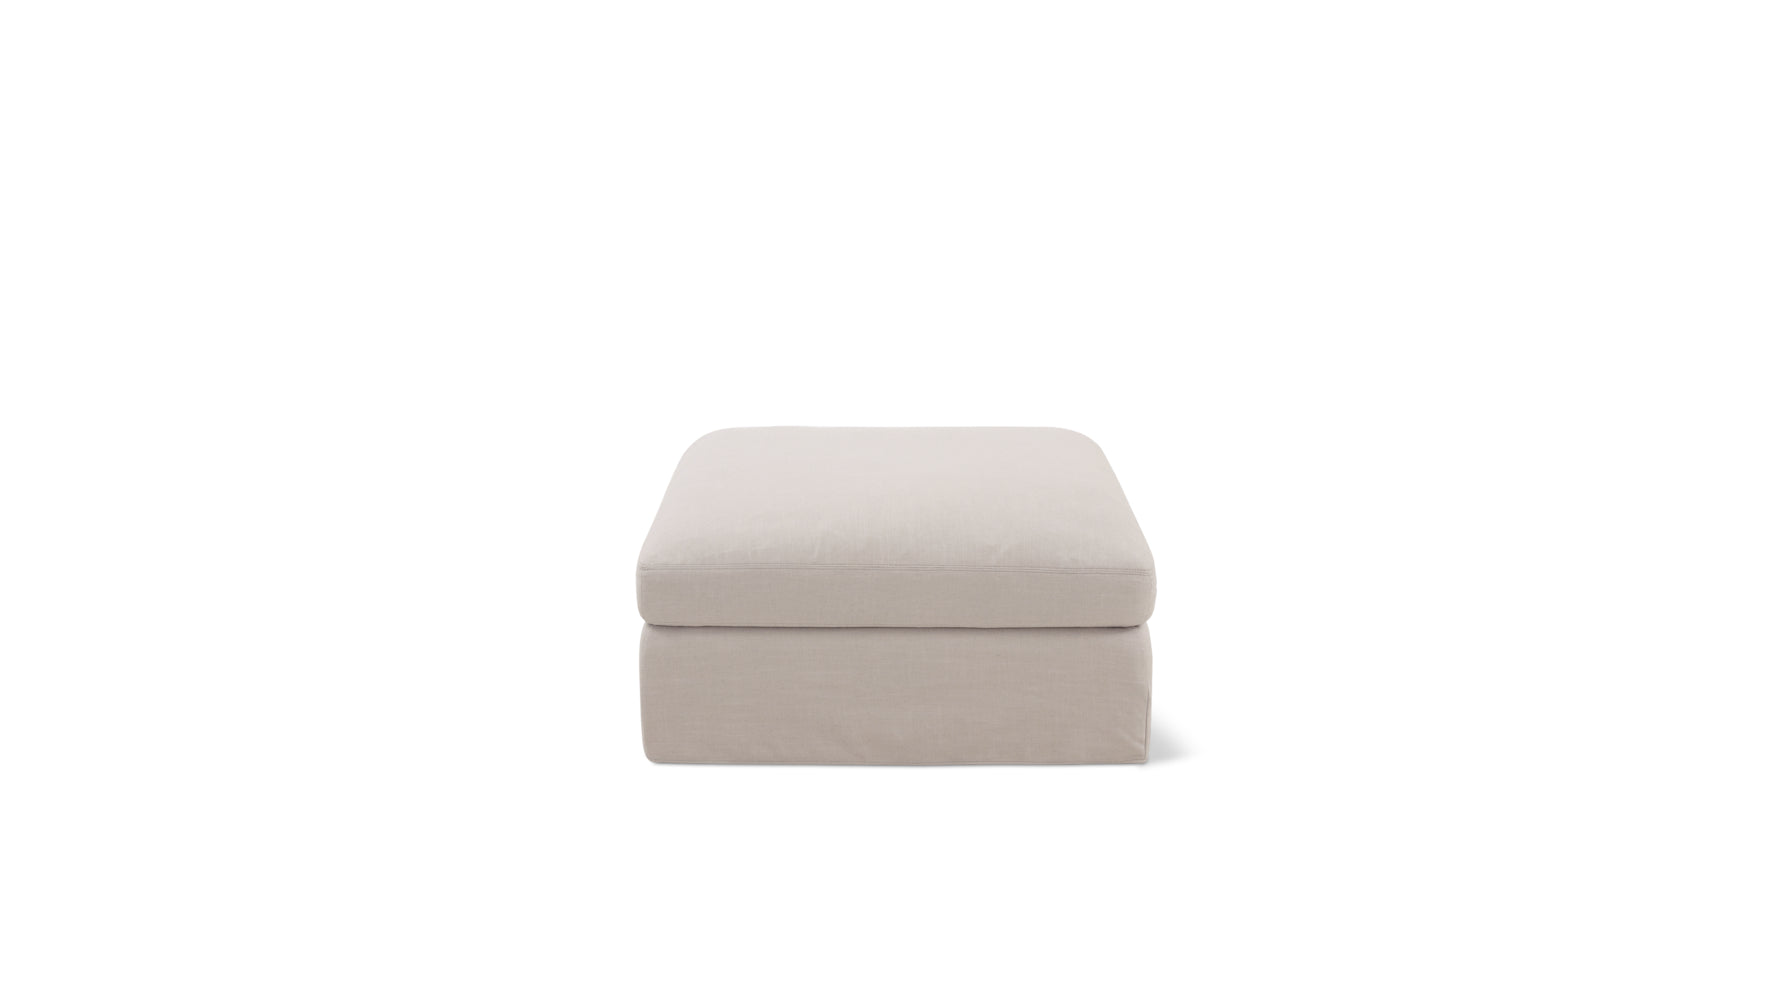 Slipcover - Get Together™ Ottoman, Standard, Clay - Image 2